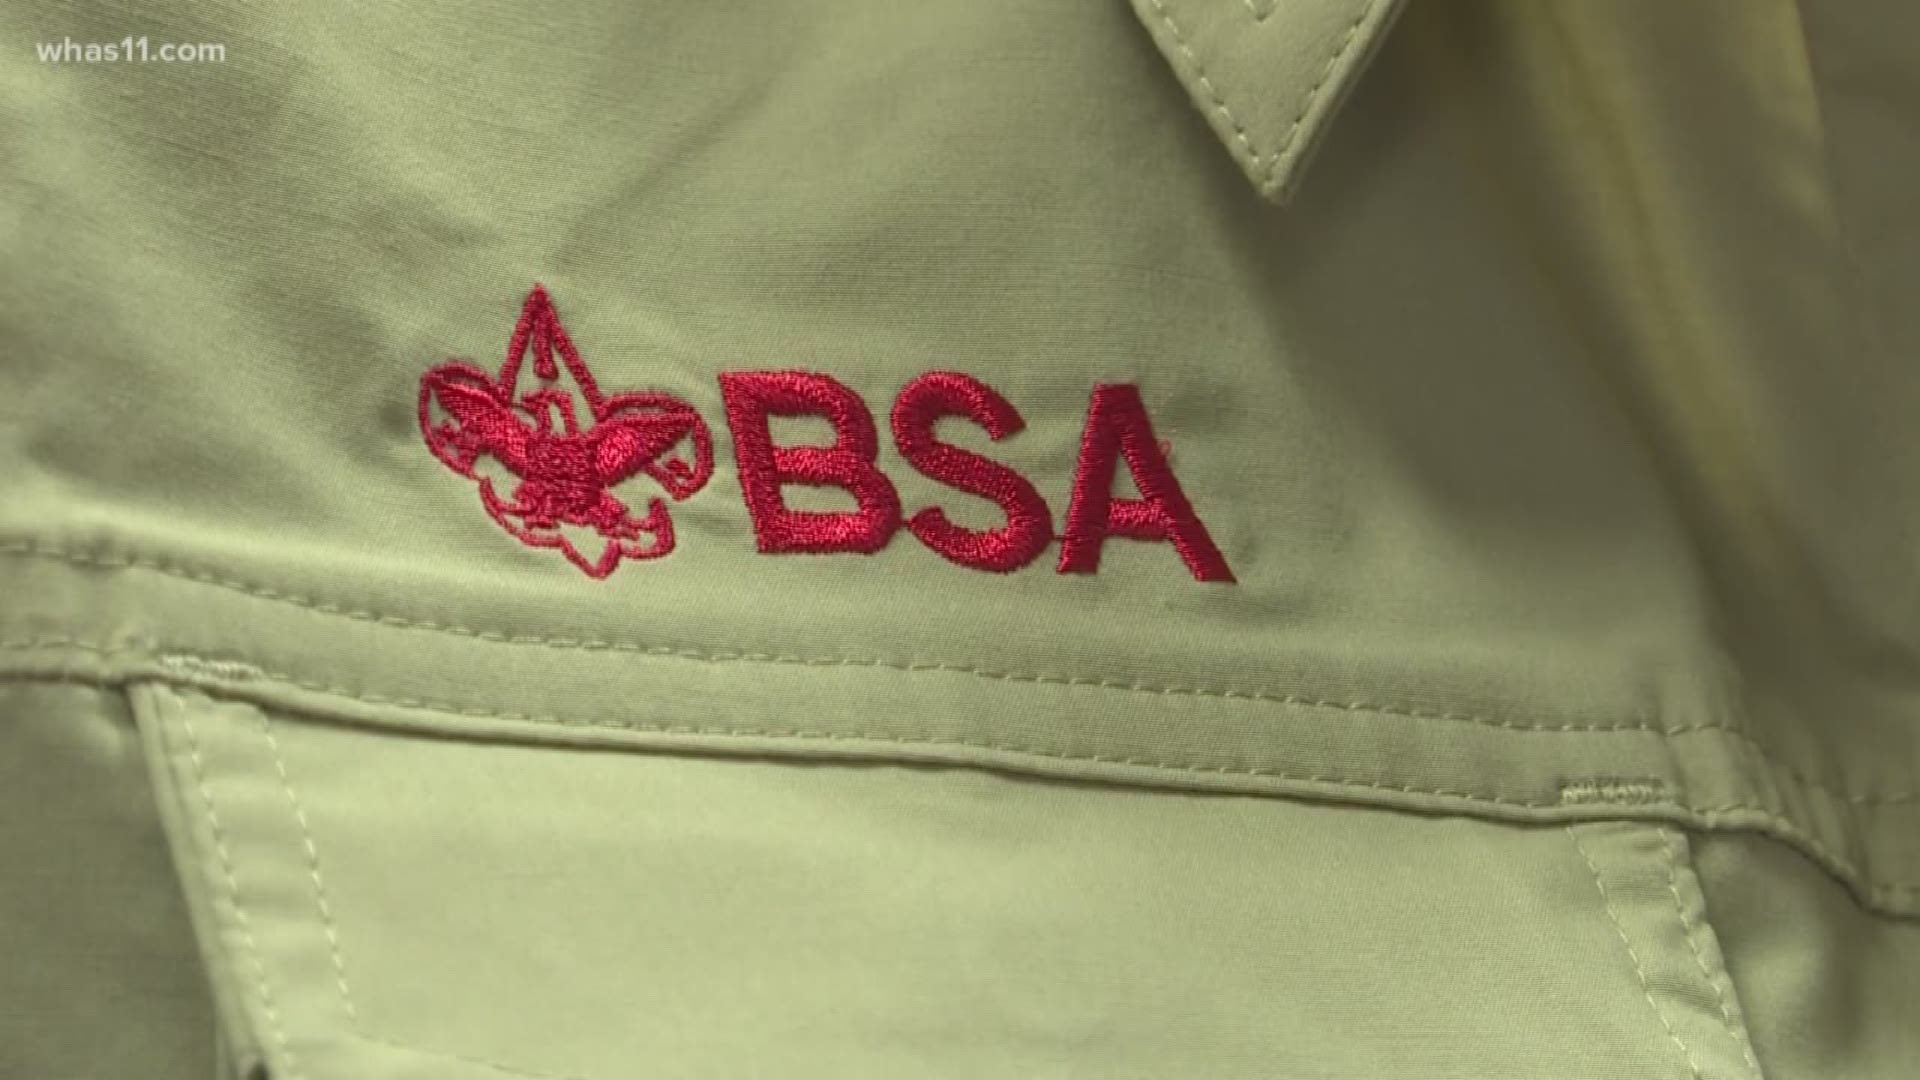 What was formerly known as the Boy Scouts program will now be Scouts BSA - and girls are welcome to join starting on February 1.